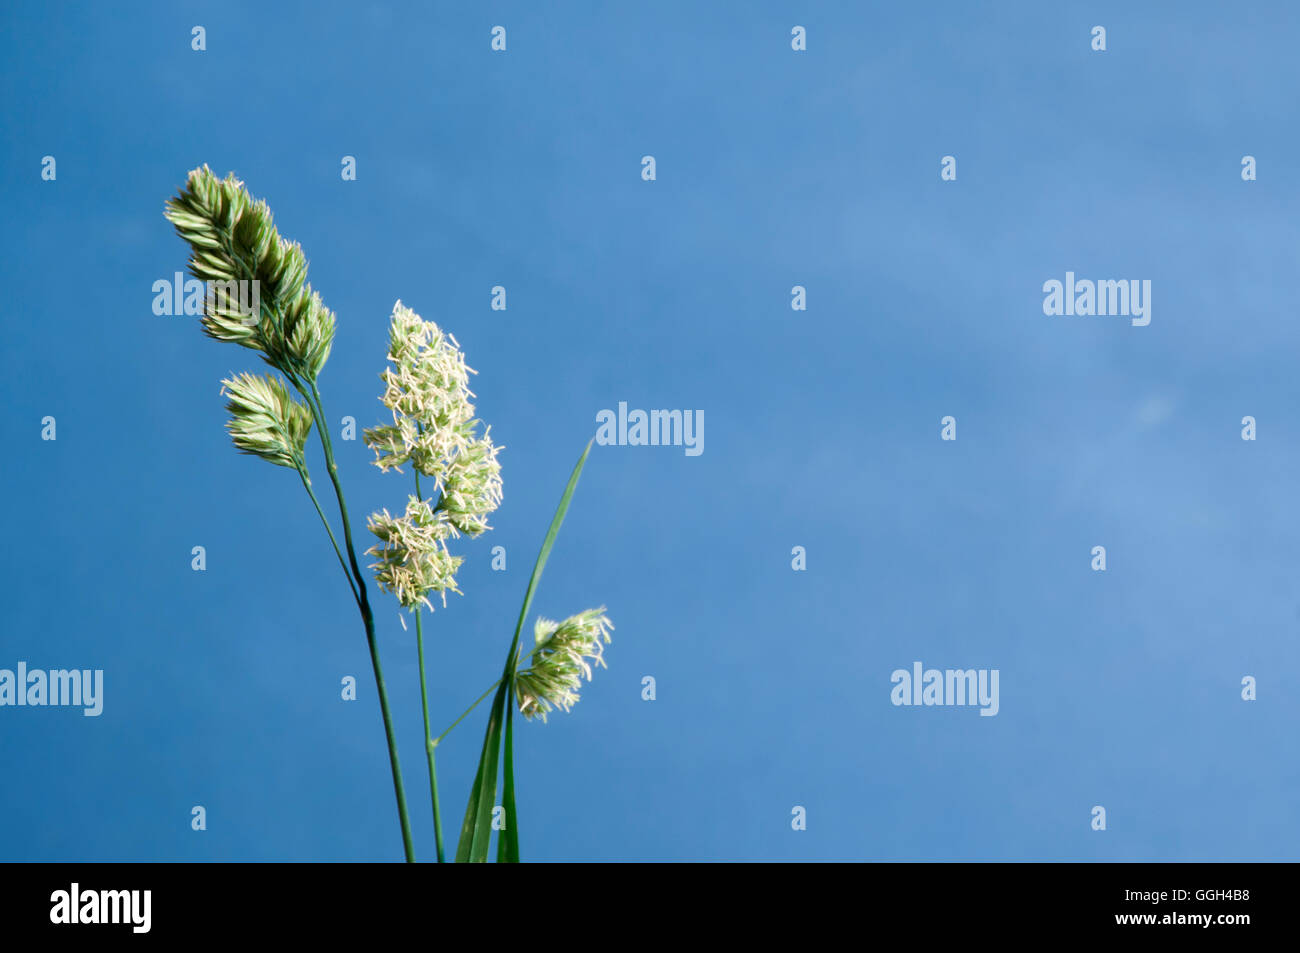 Cockfoot grass over blue background, close up Stock Photo